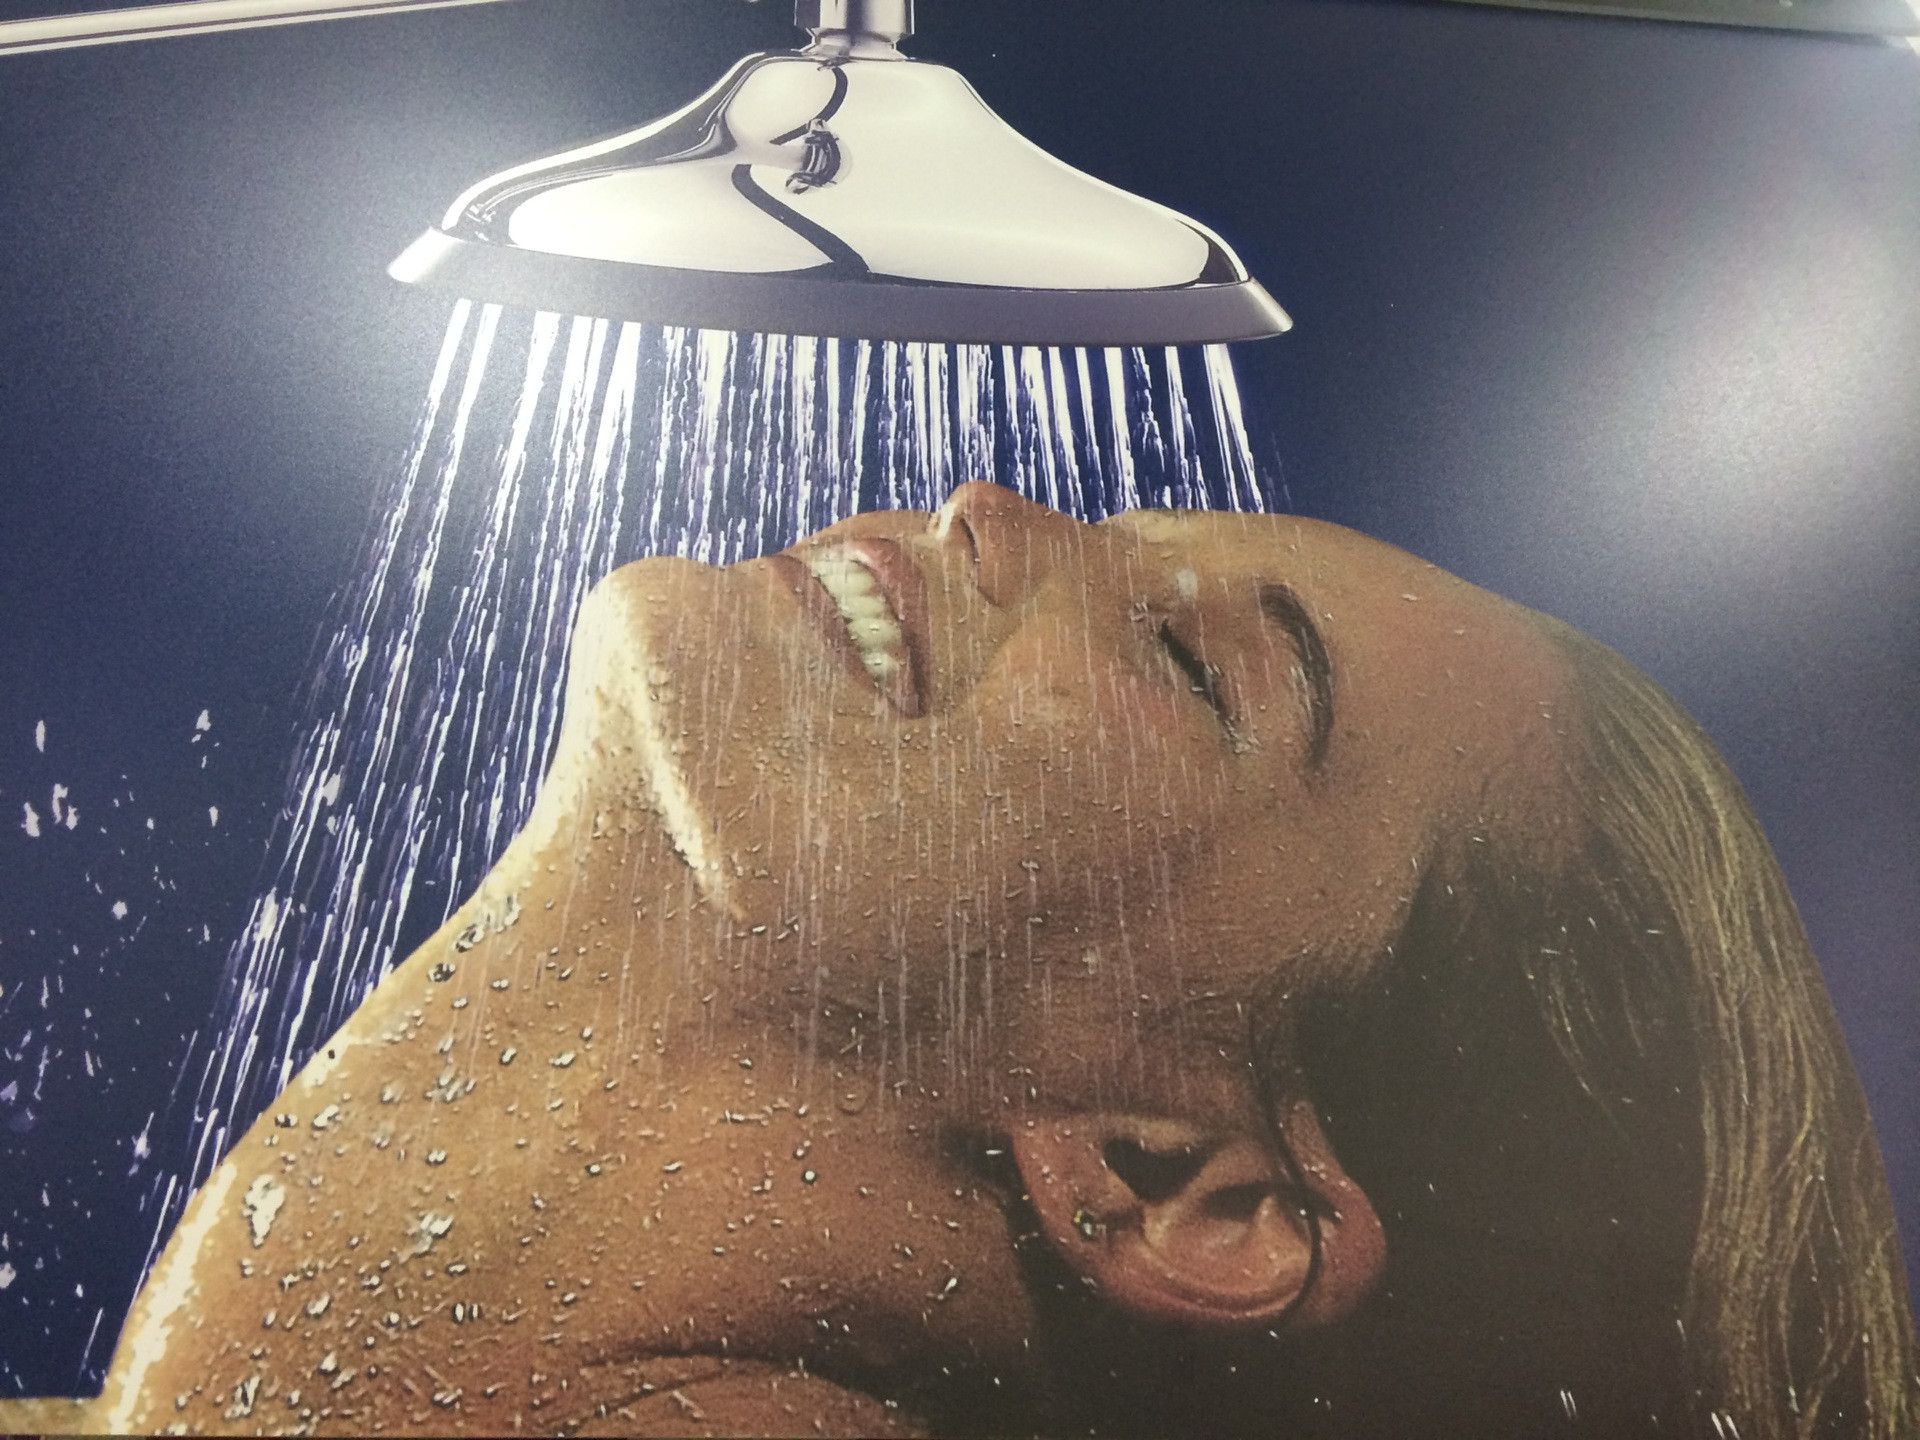 Awww !!!yes finally a shower that works with my broken neck